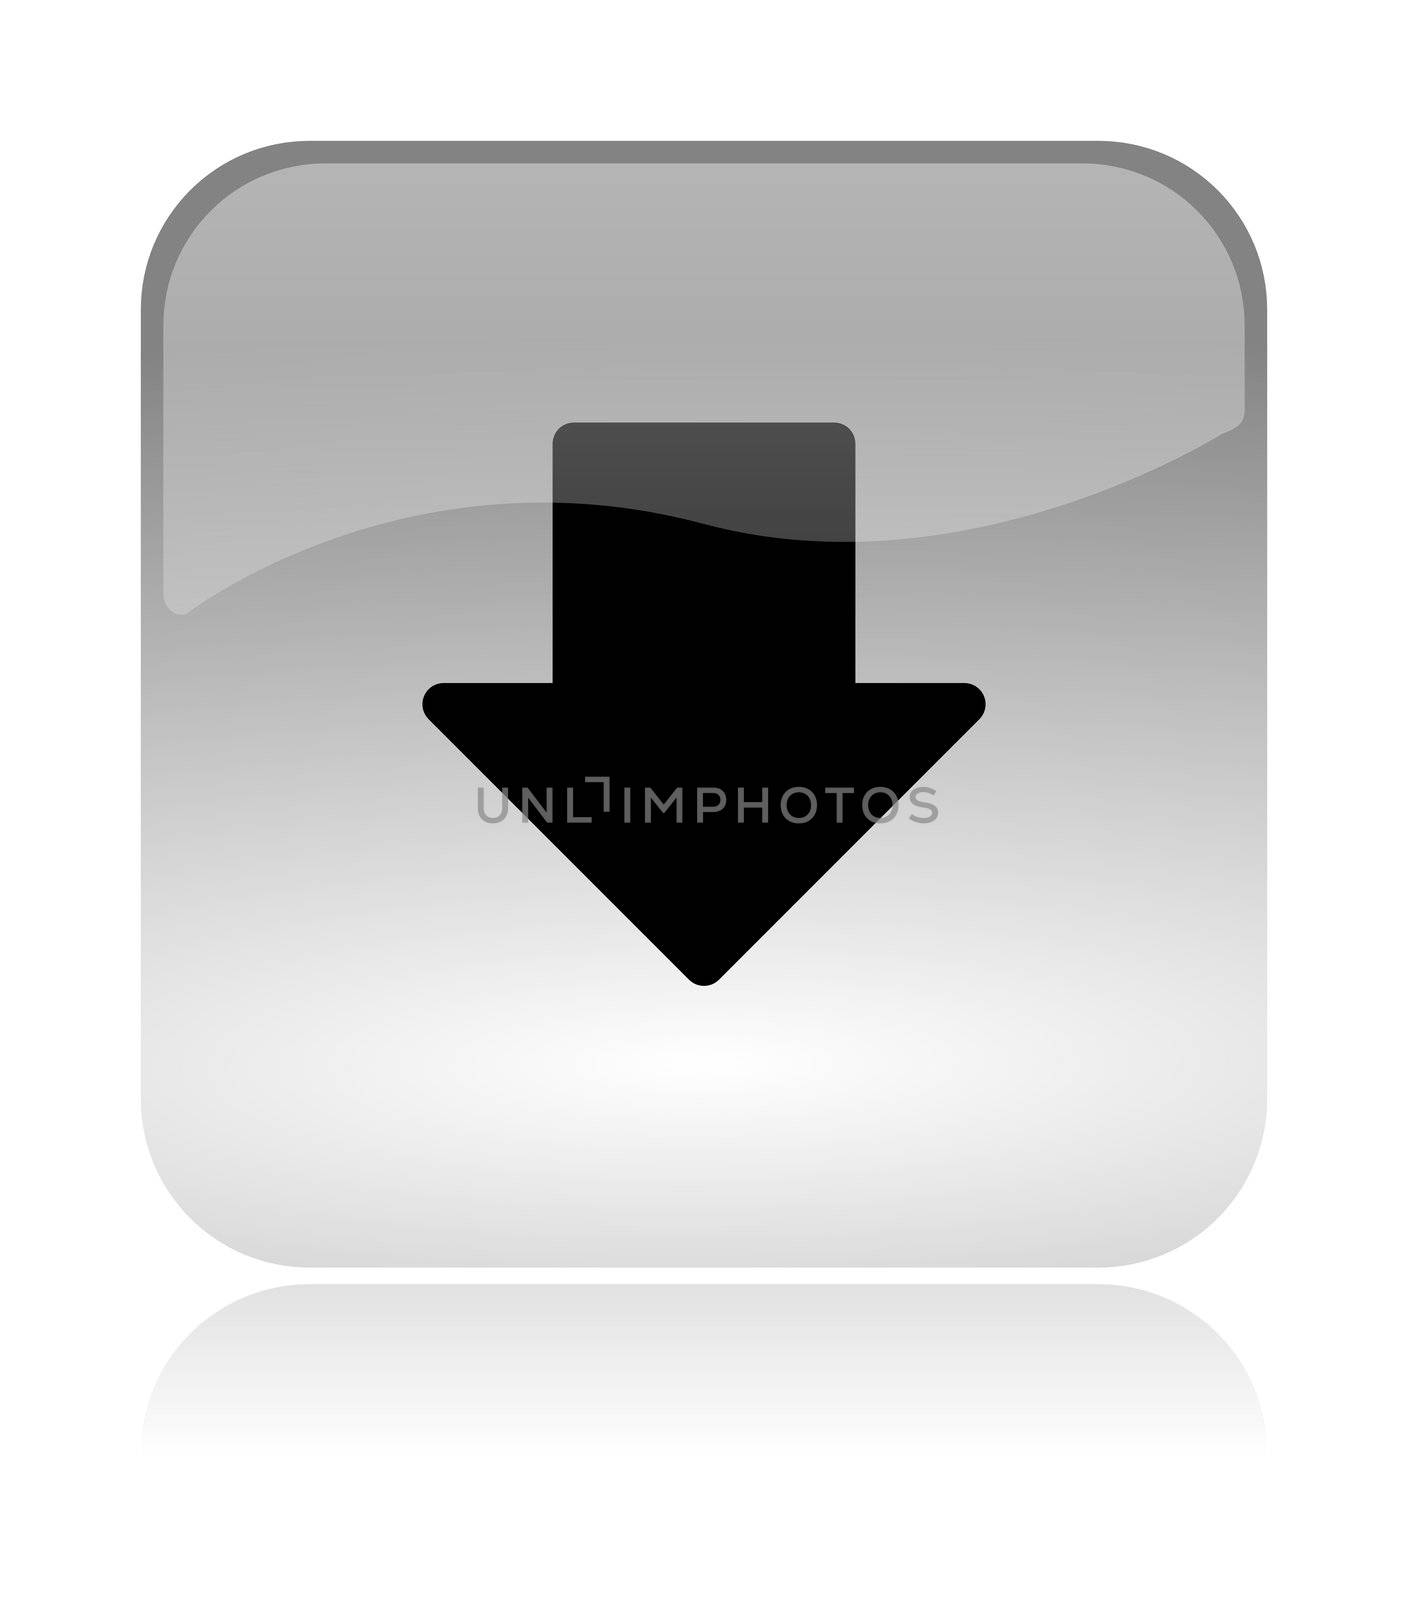 Down arrow bottom, white, transparent and glossy web interface icon with reflection